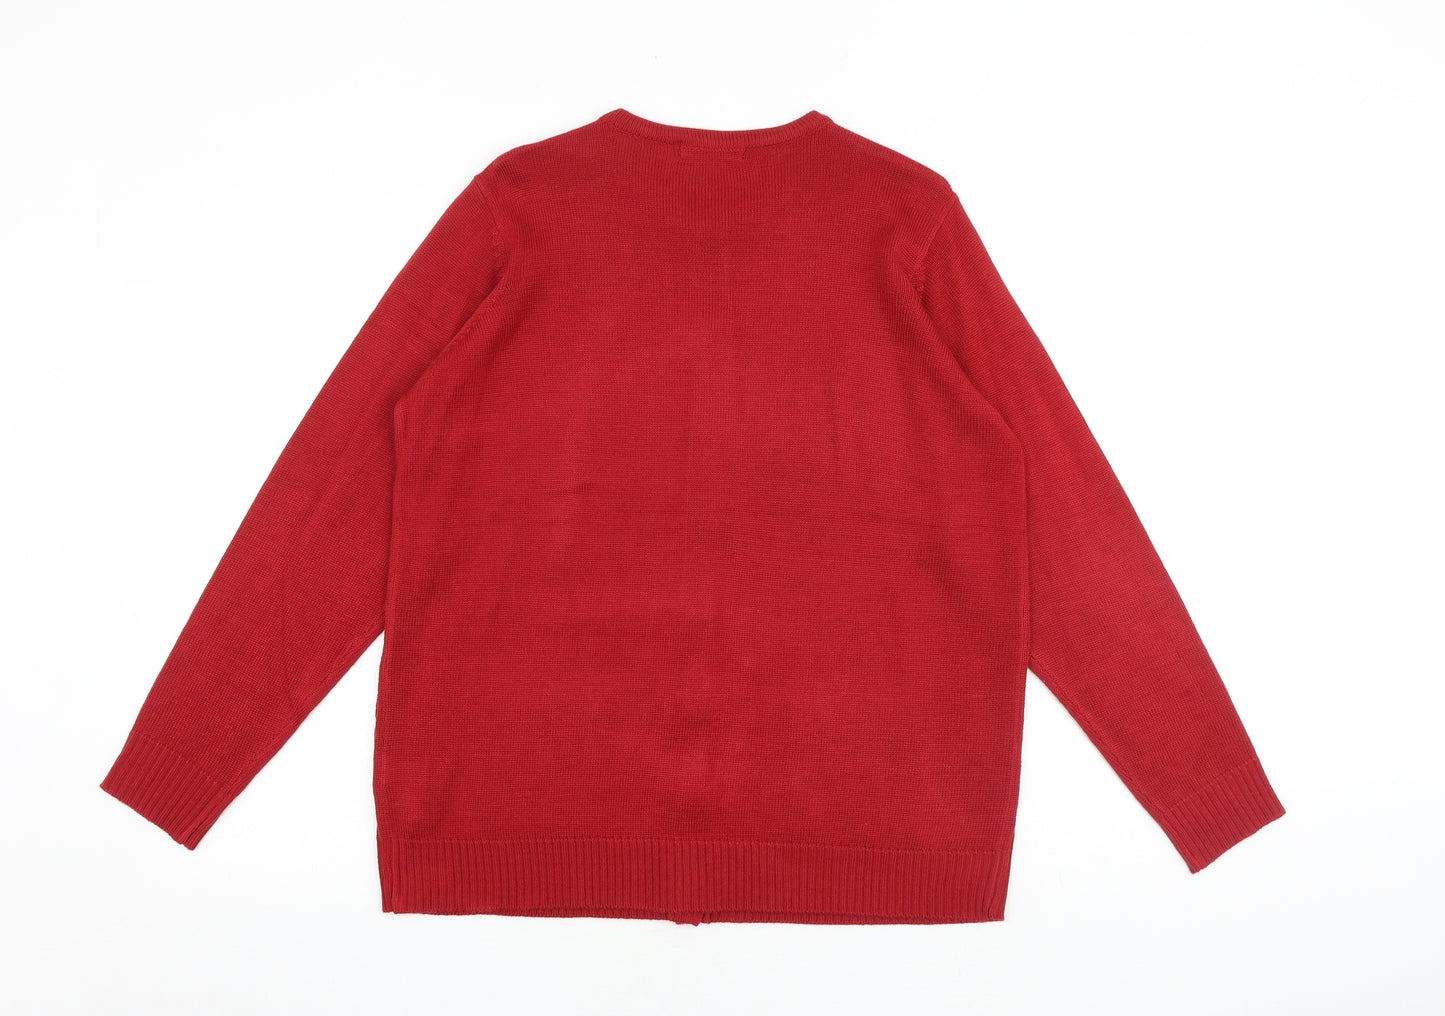 Bonmarché Womens Red Round Neck Acrylic Cardigan Jumper Size M